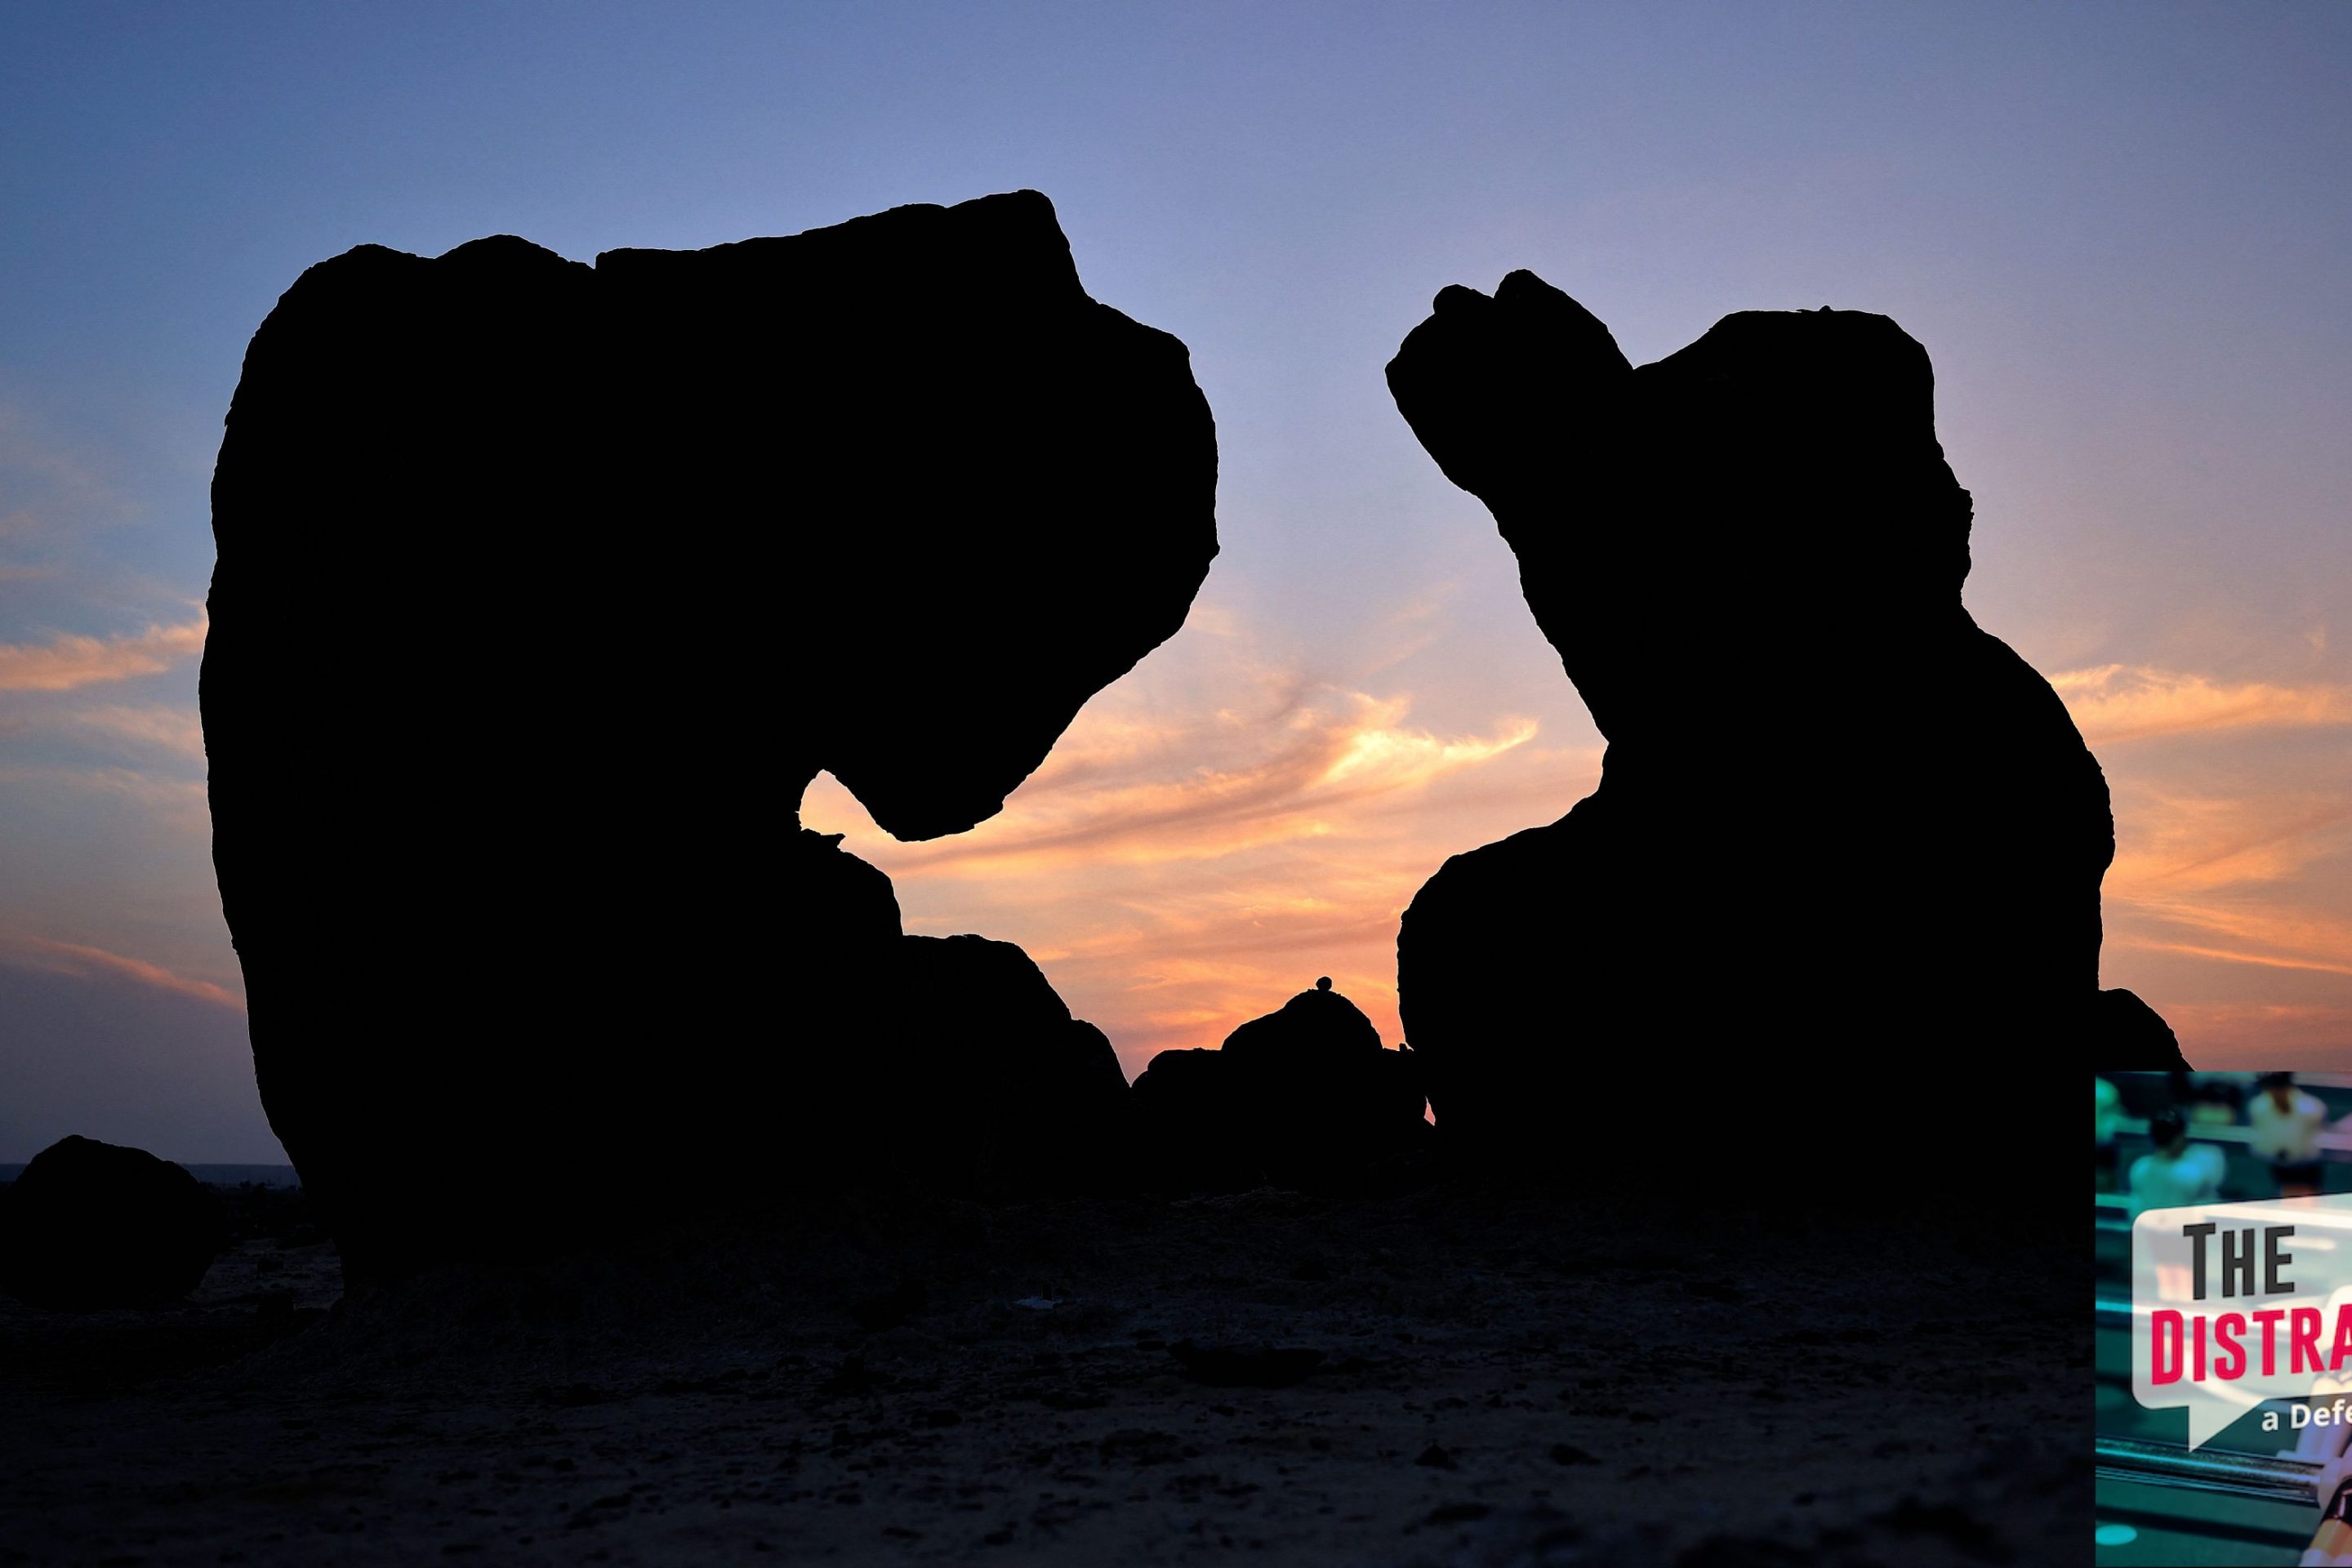 This is a photo of a rock formation in Oman, I just thought it looked neat.